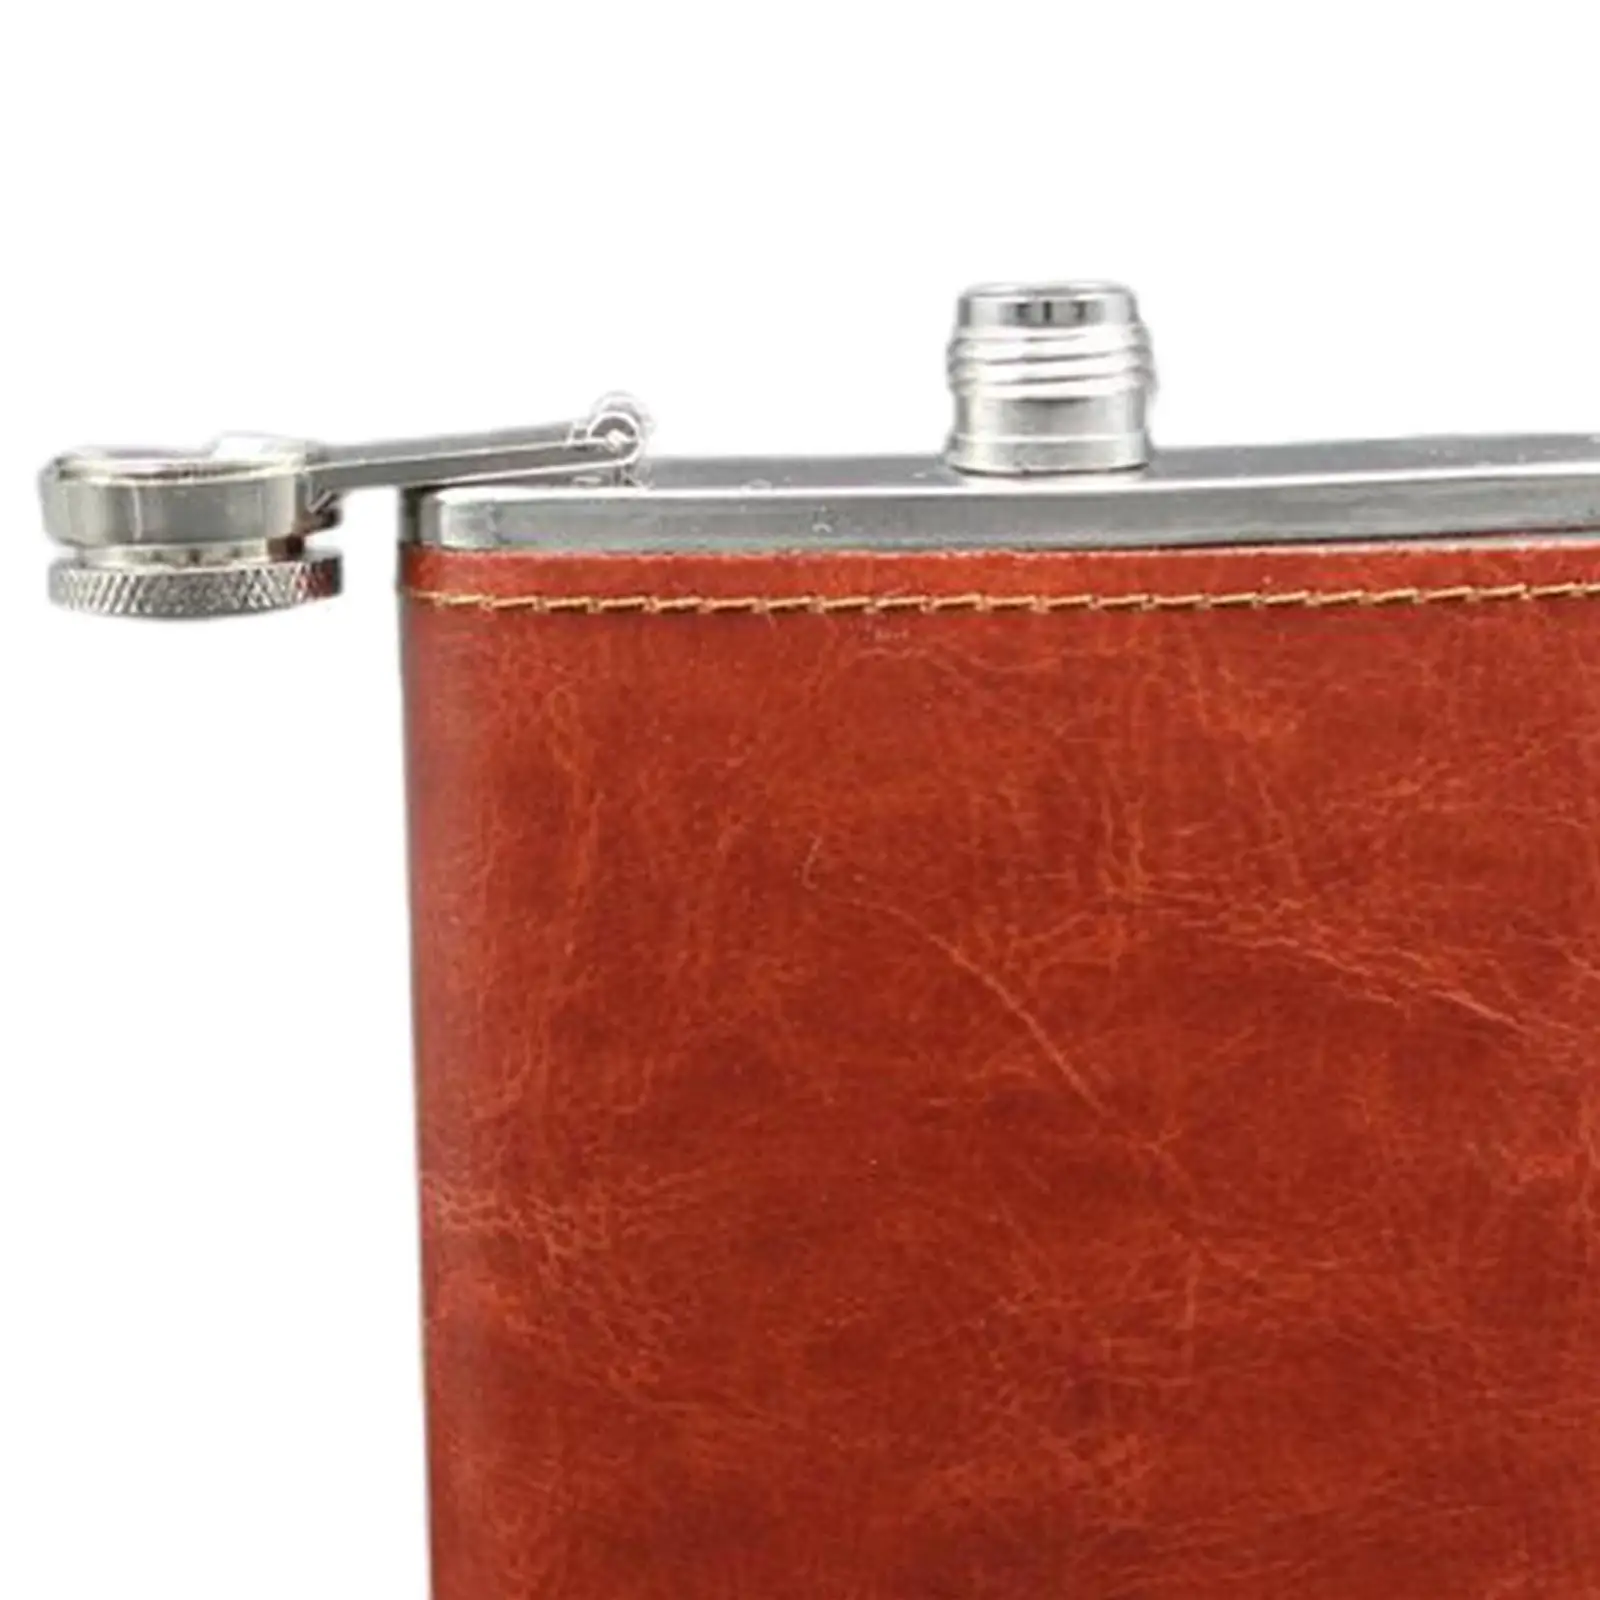 U Typed Hip Flask Classic Sealed Portable Wine Bottle Liquor Pocket Drinkware for Fishing Home Goods Camping Drinker Hunting